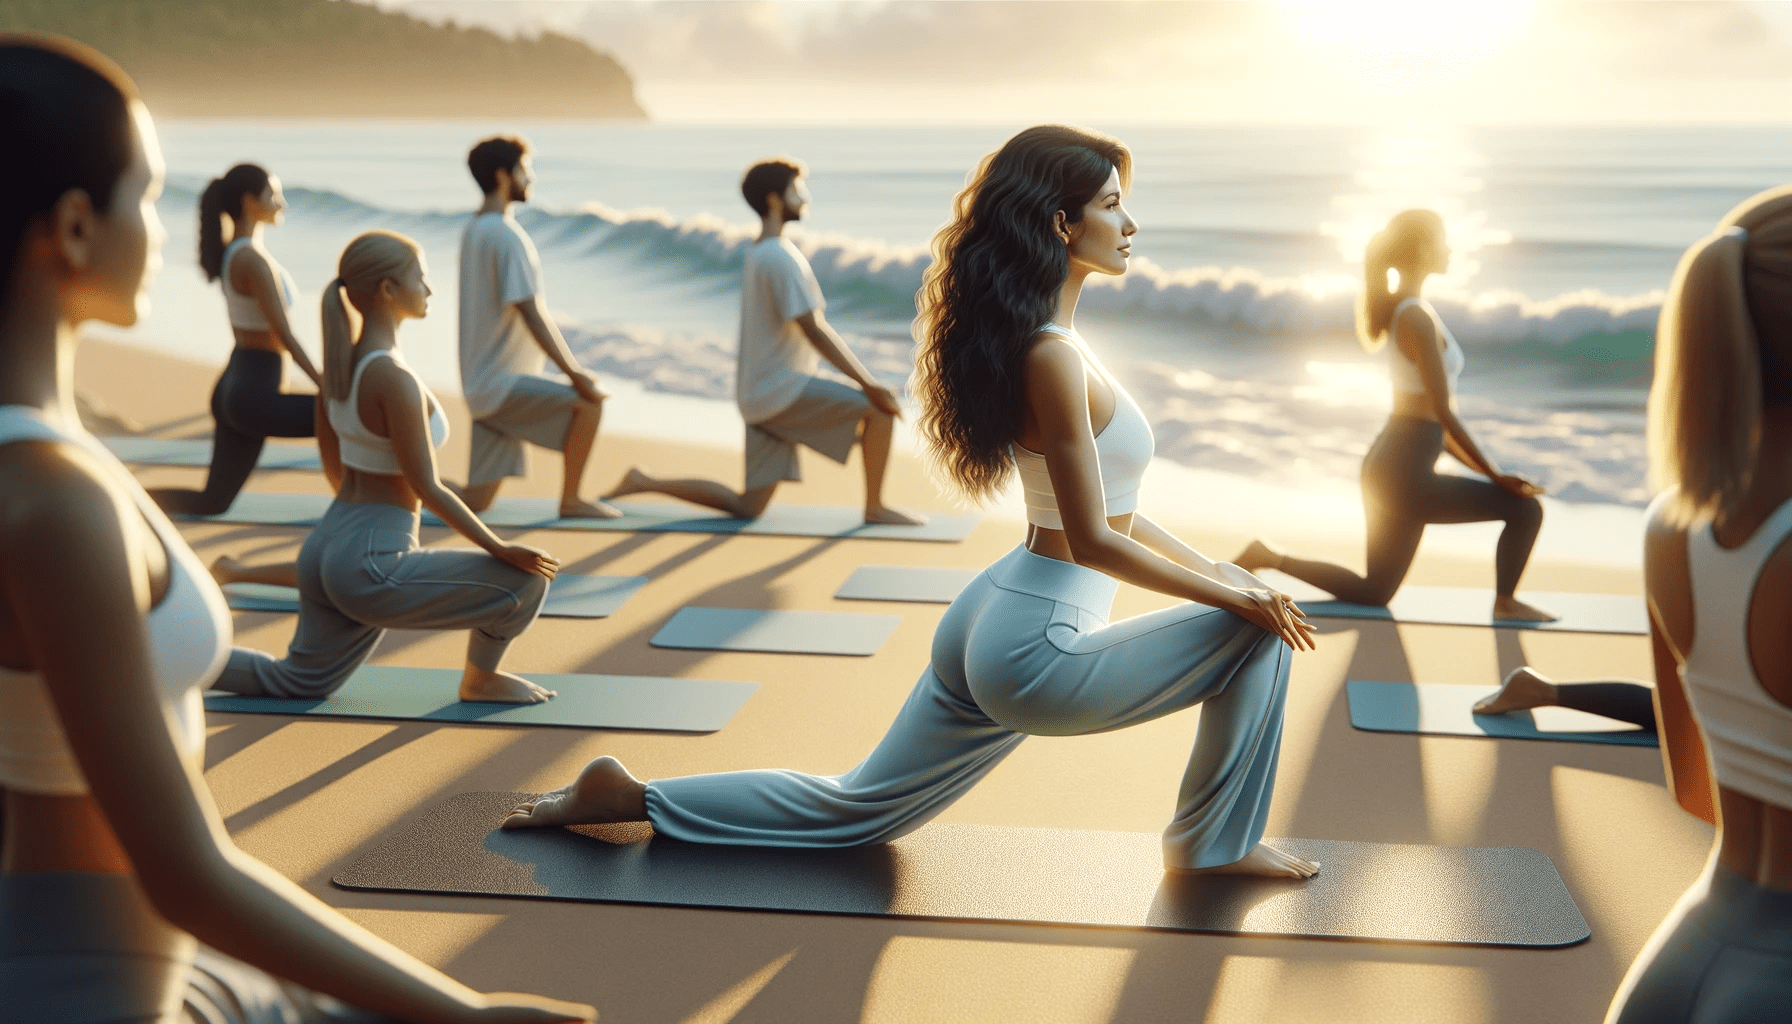 image-of-a-female-yoga-instructor-leading-a-sunrise-yoga-session-on-a-beach.-The-instructor-is-a-Middle-Eastern-woman-in-her-late-20s